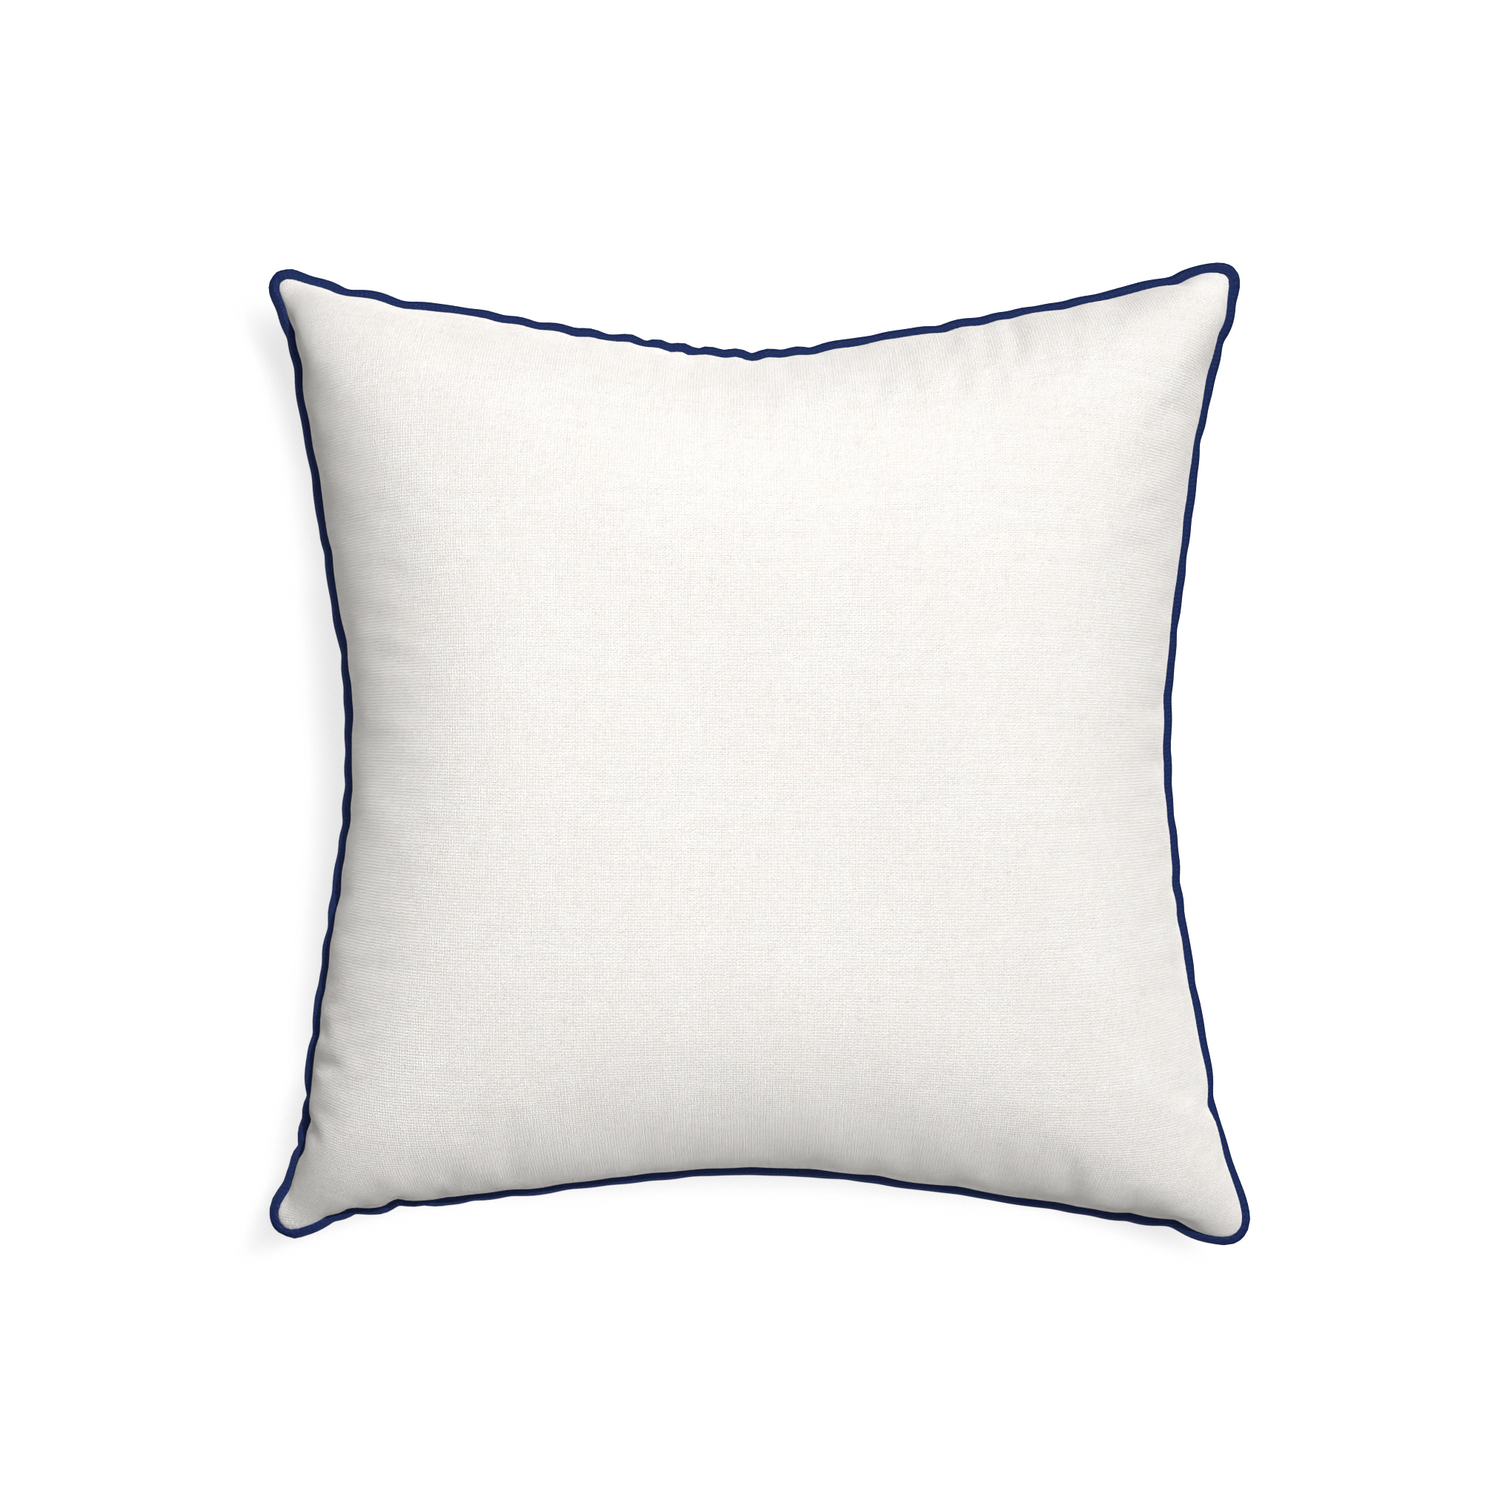 22-square flour custom pillow with midnight piping on white background